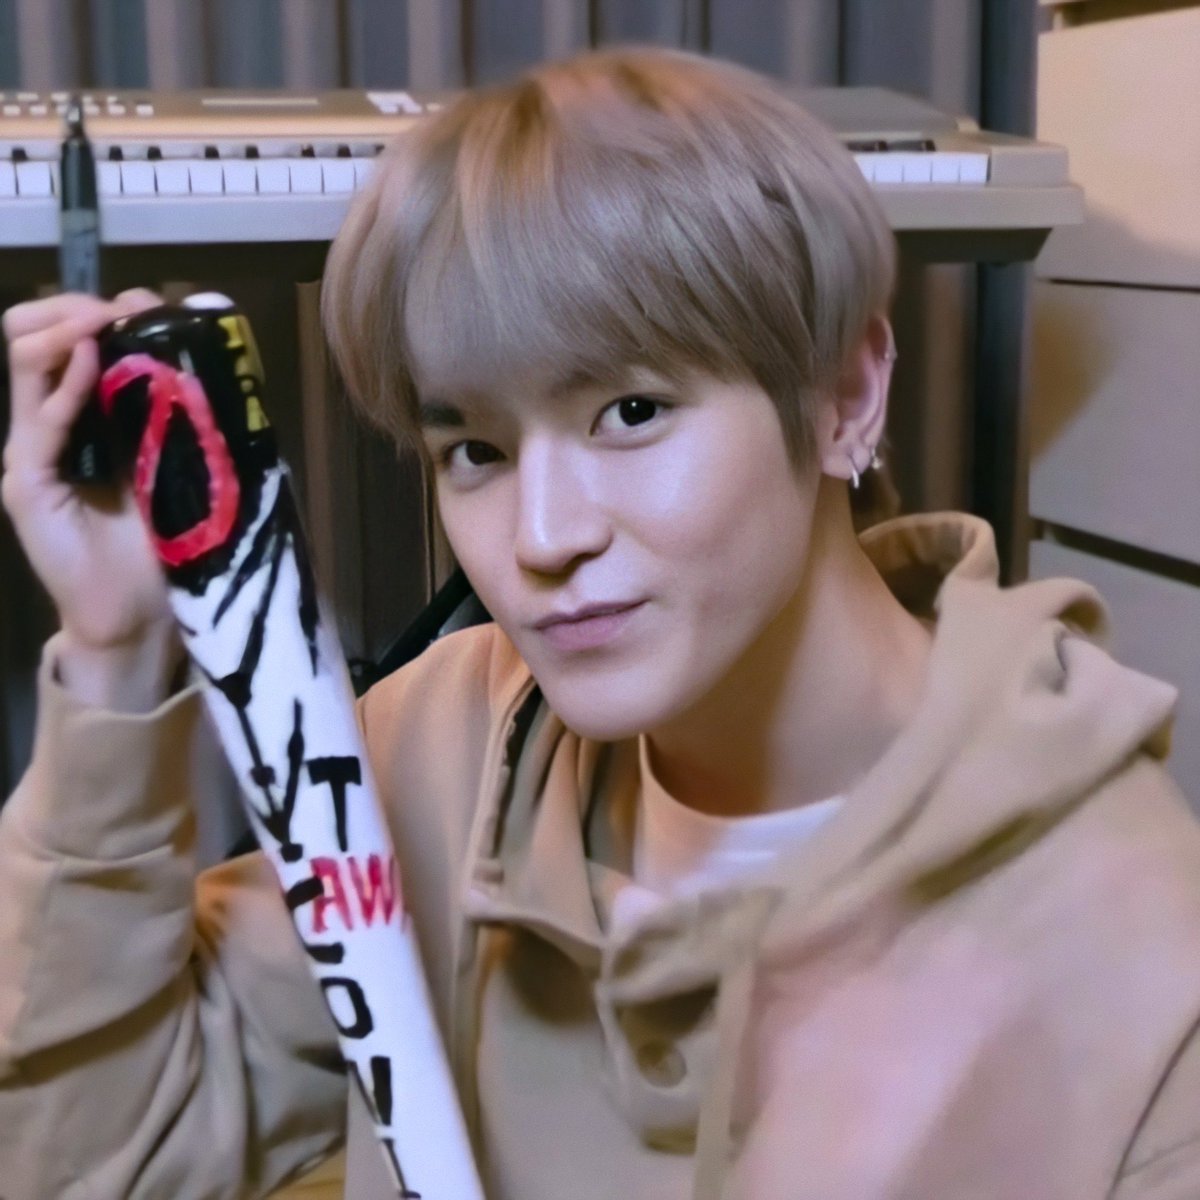 Taeyong loves to customize and personalize his stuff! So why not his own album? A lot of little messages and drawings could be on the cd’s album too !